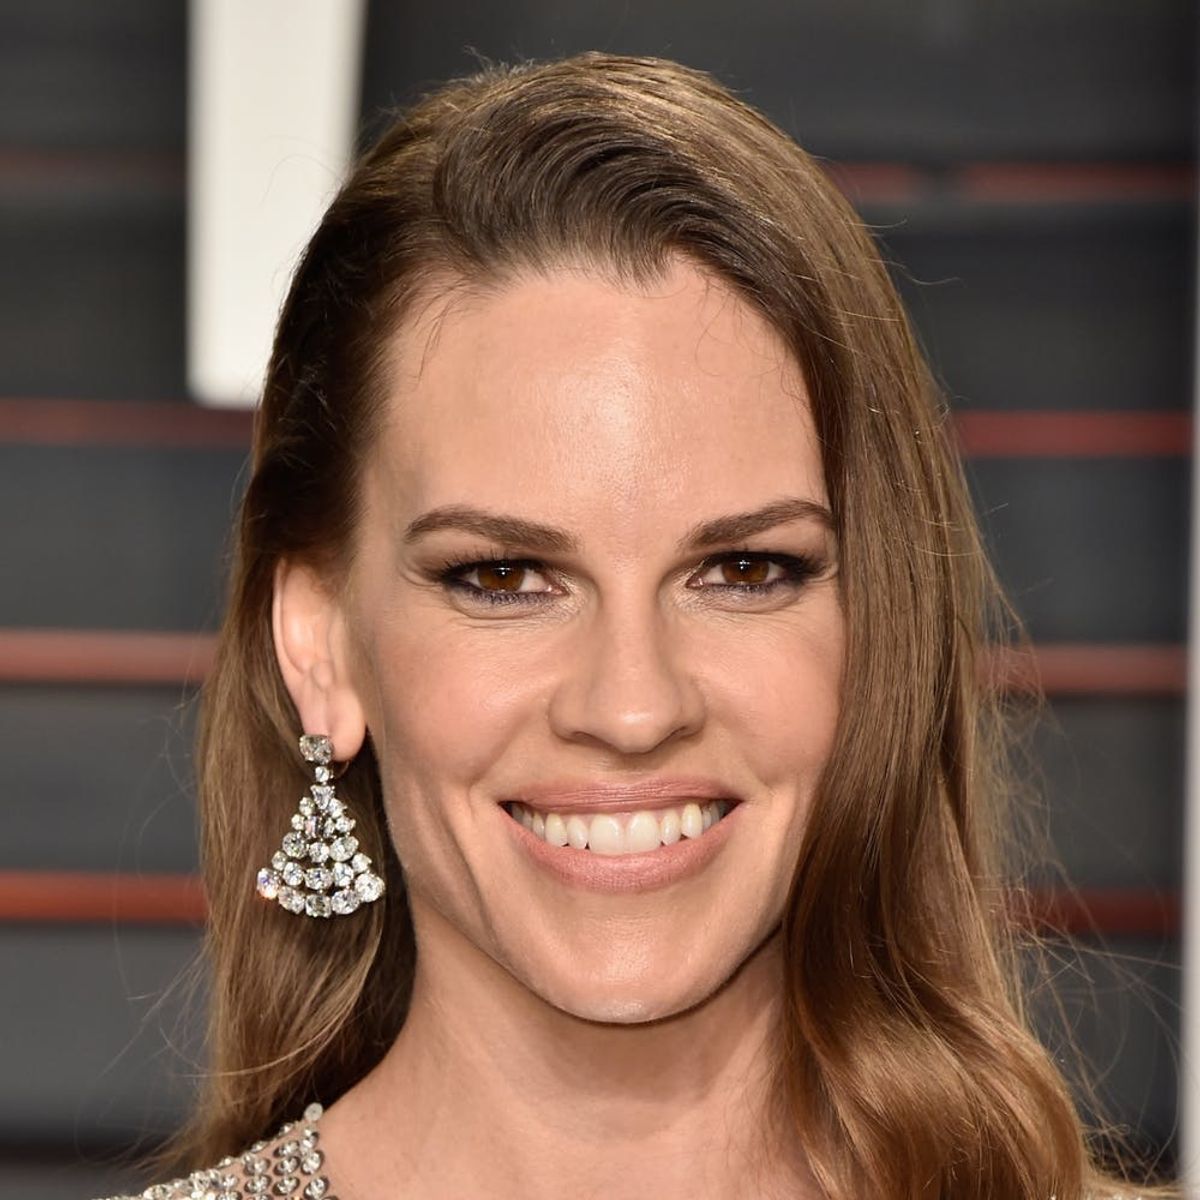 Ladies and Ladies: Hilary Swank Wants to Share Your Story